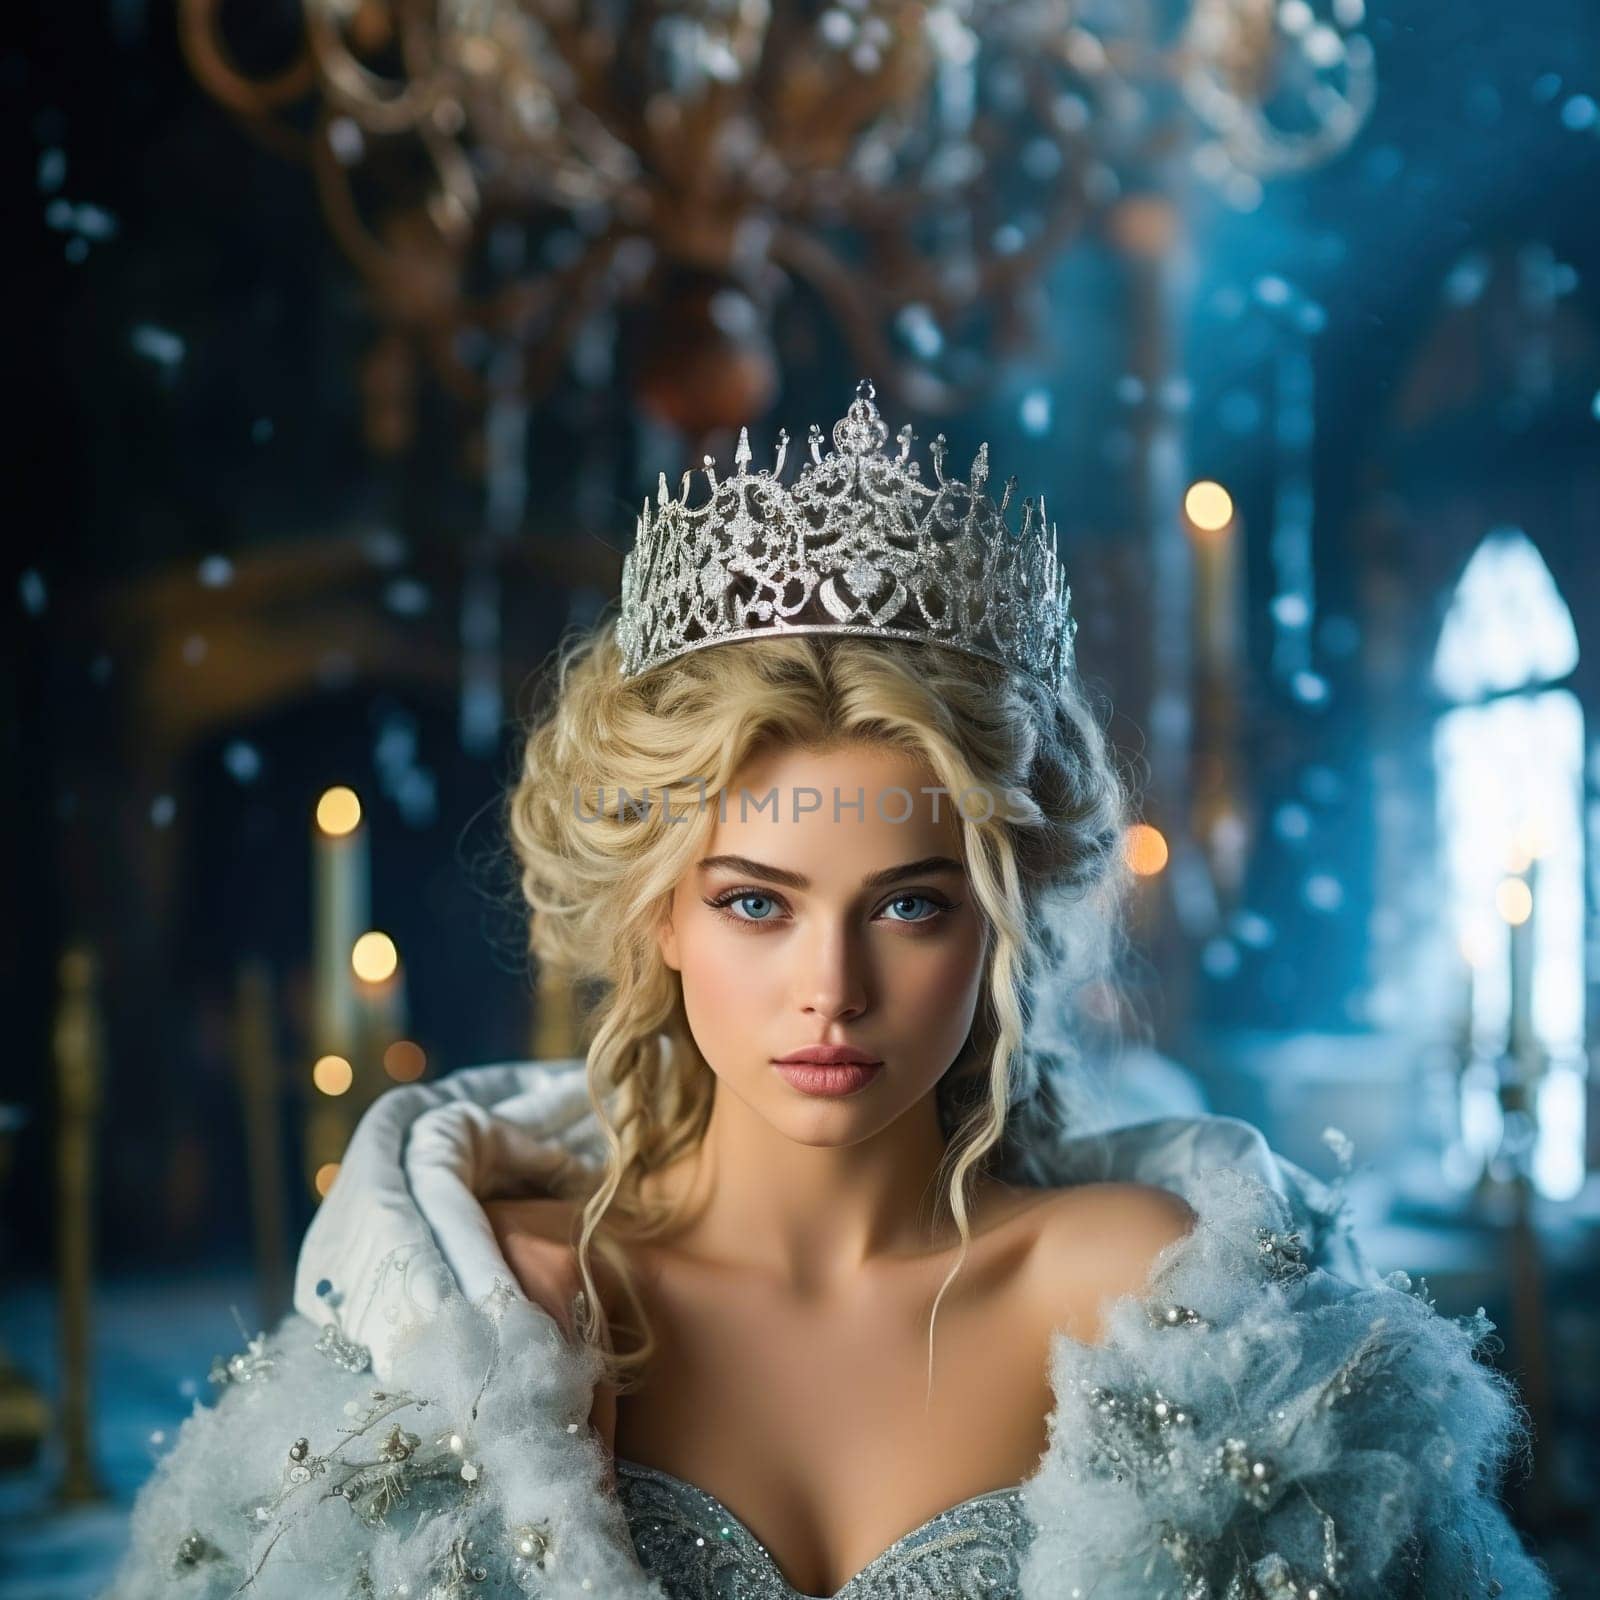 The Snow Queen in a Crown by Yurich32